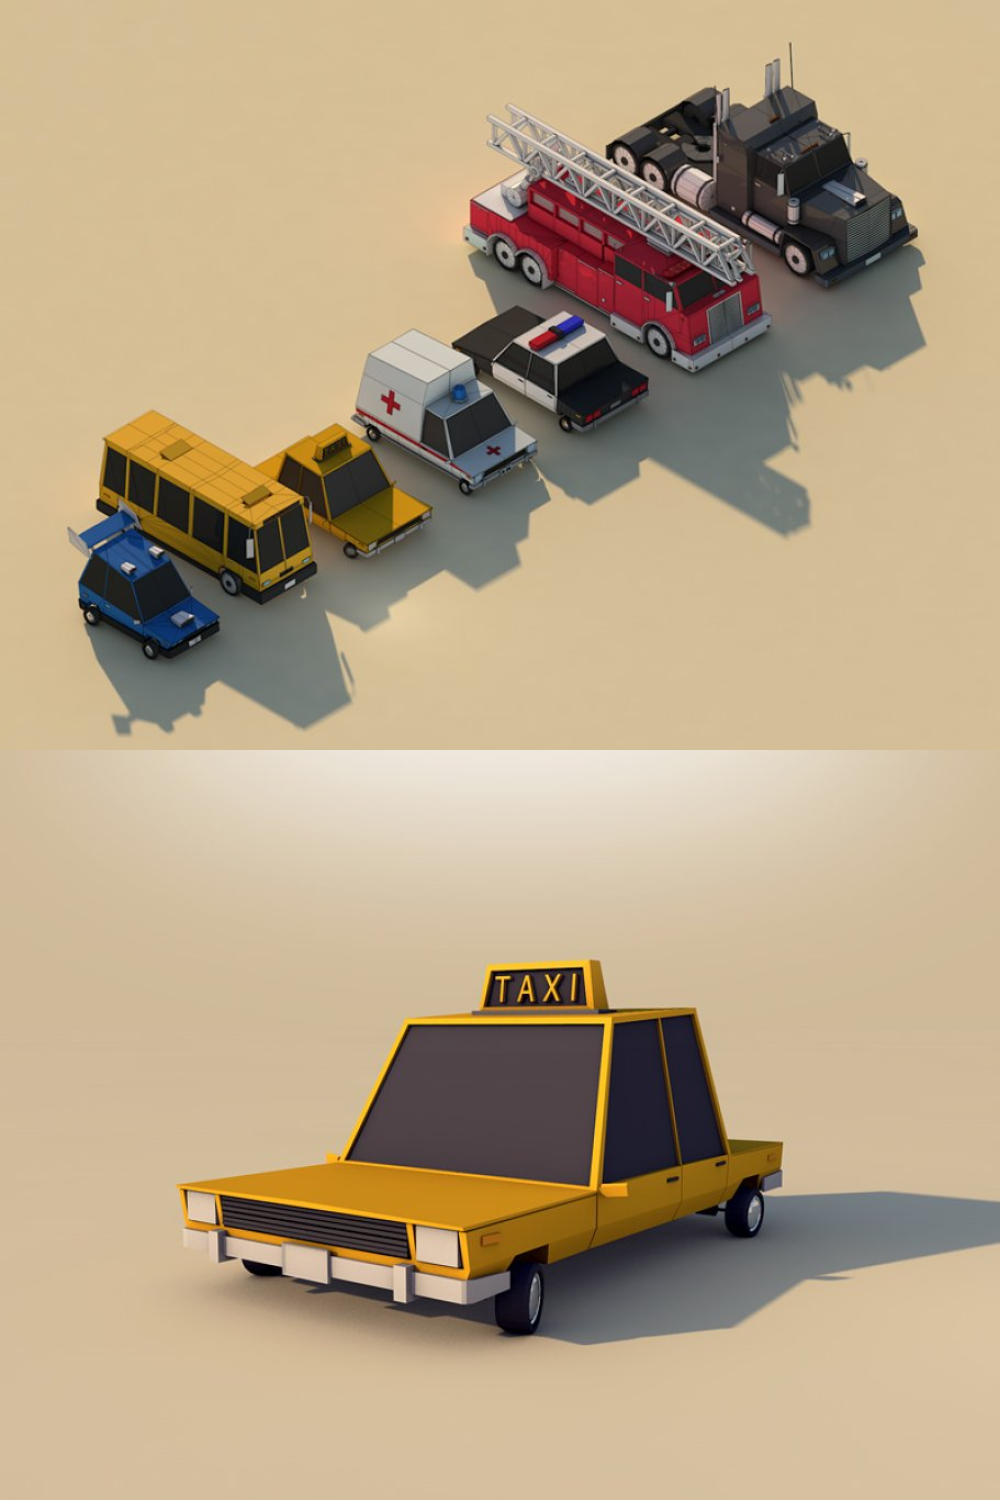 Low Poly Cars Asset Pack 1 - Pinterest.